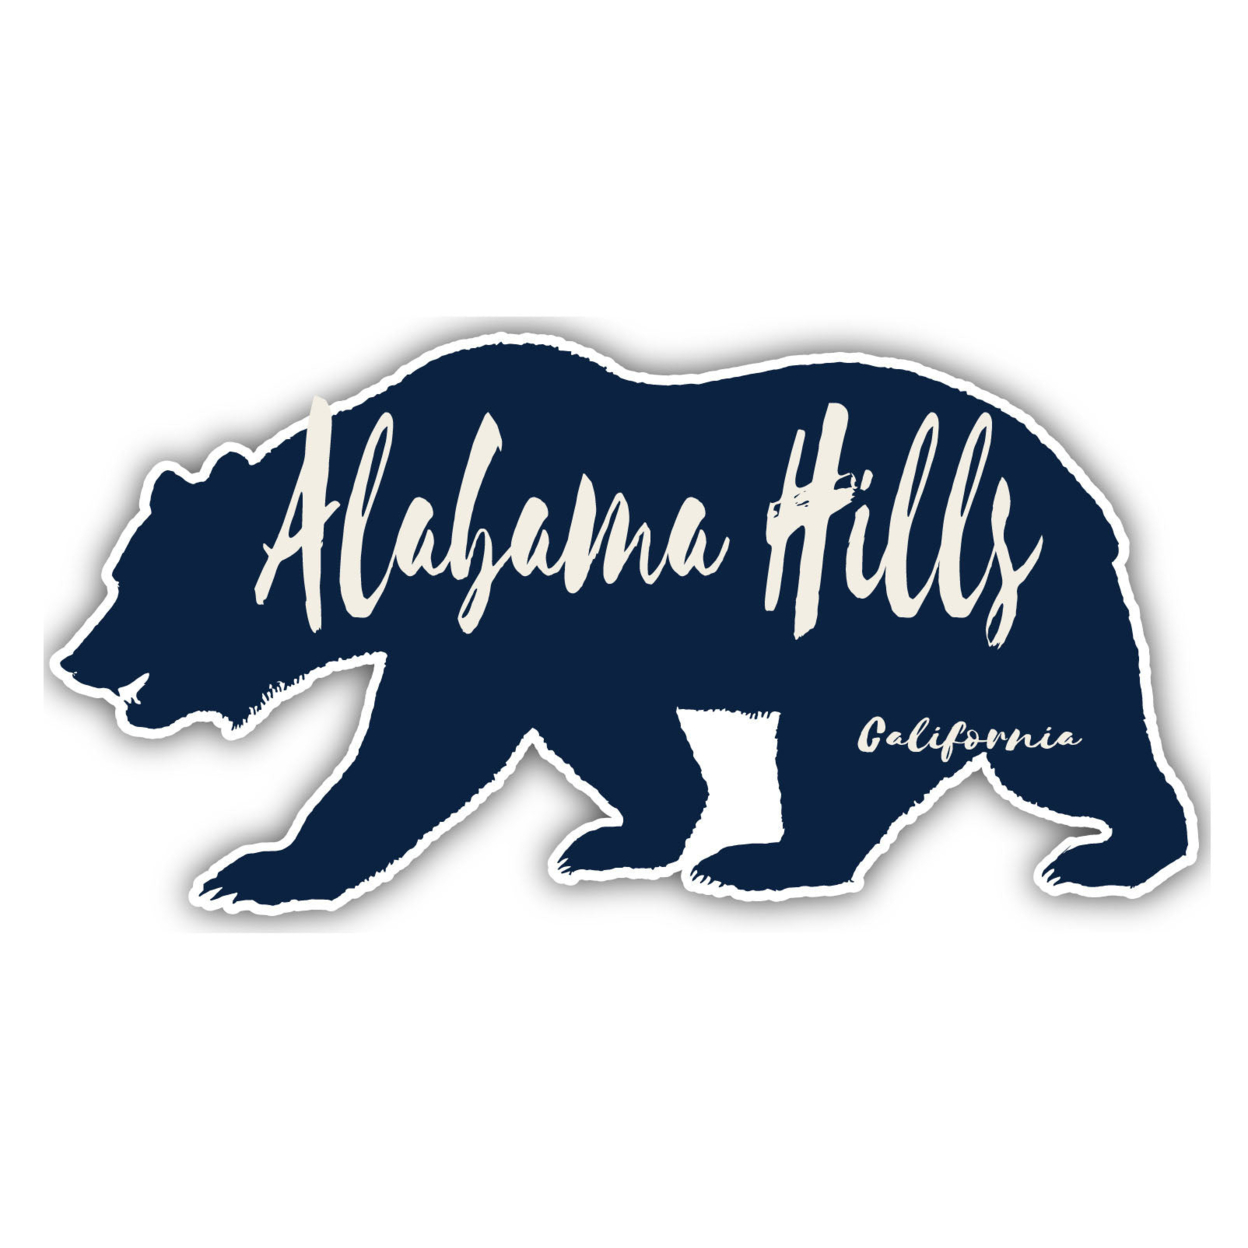 Alabama Hills California Souvenir Decorative Stickers (Choose Theme And Size) - 4-Pack, 2-Inch, Great Outdoors